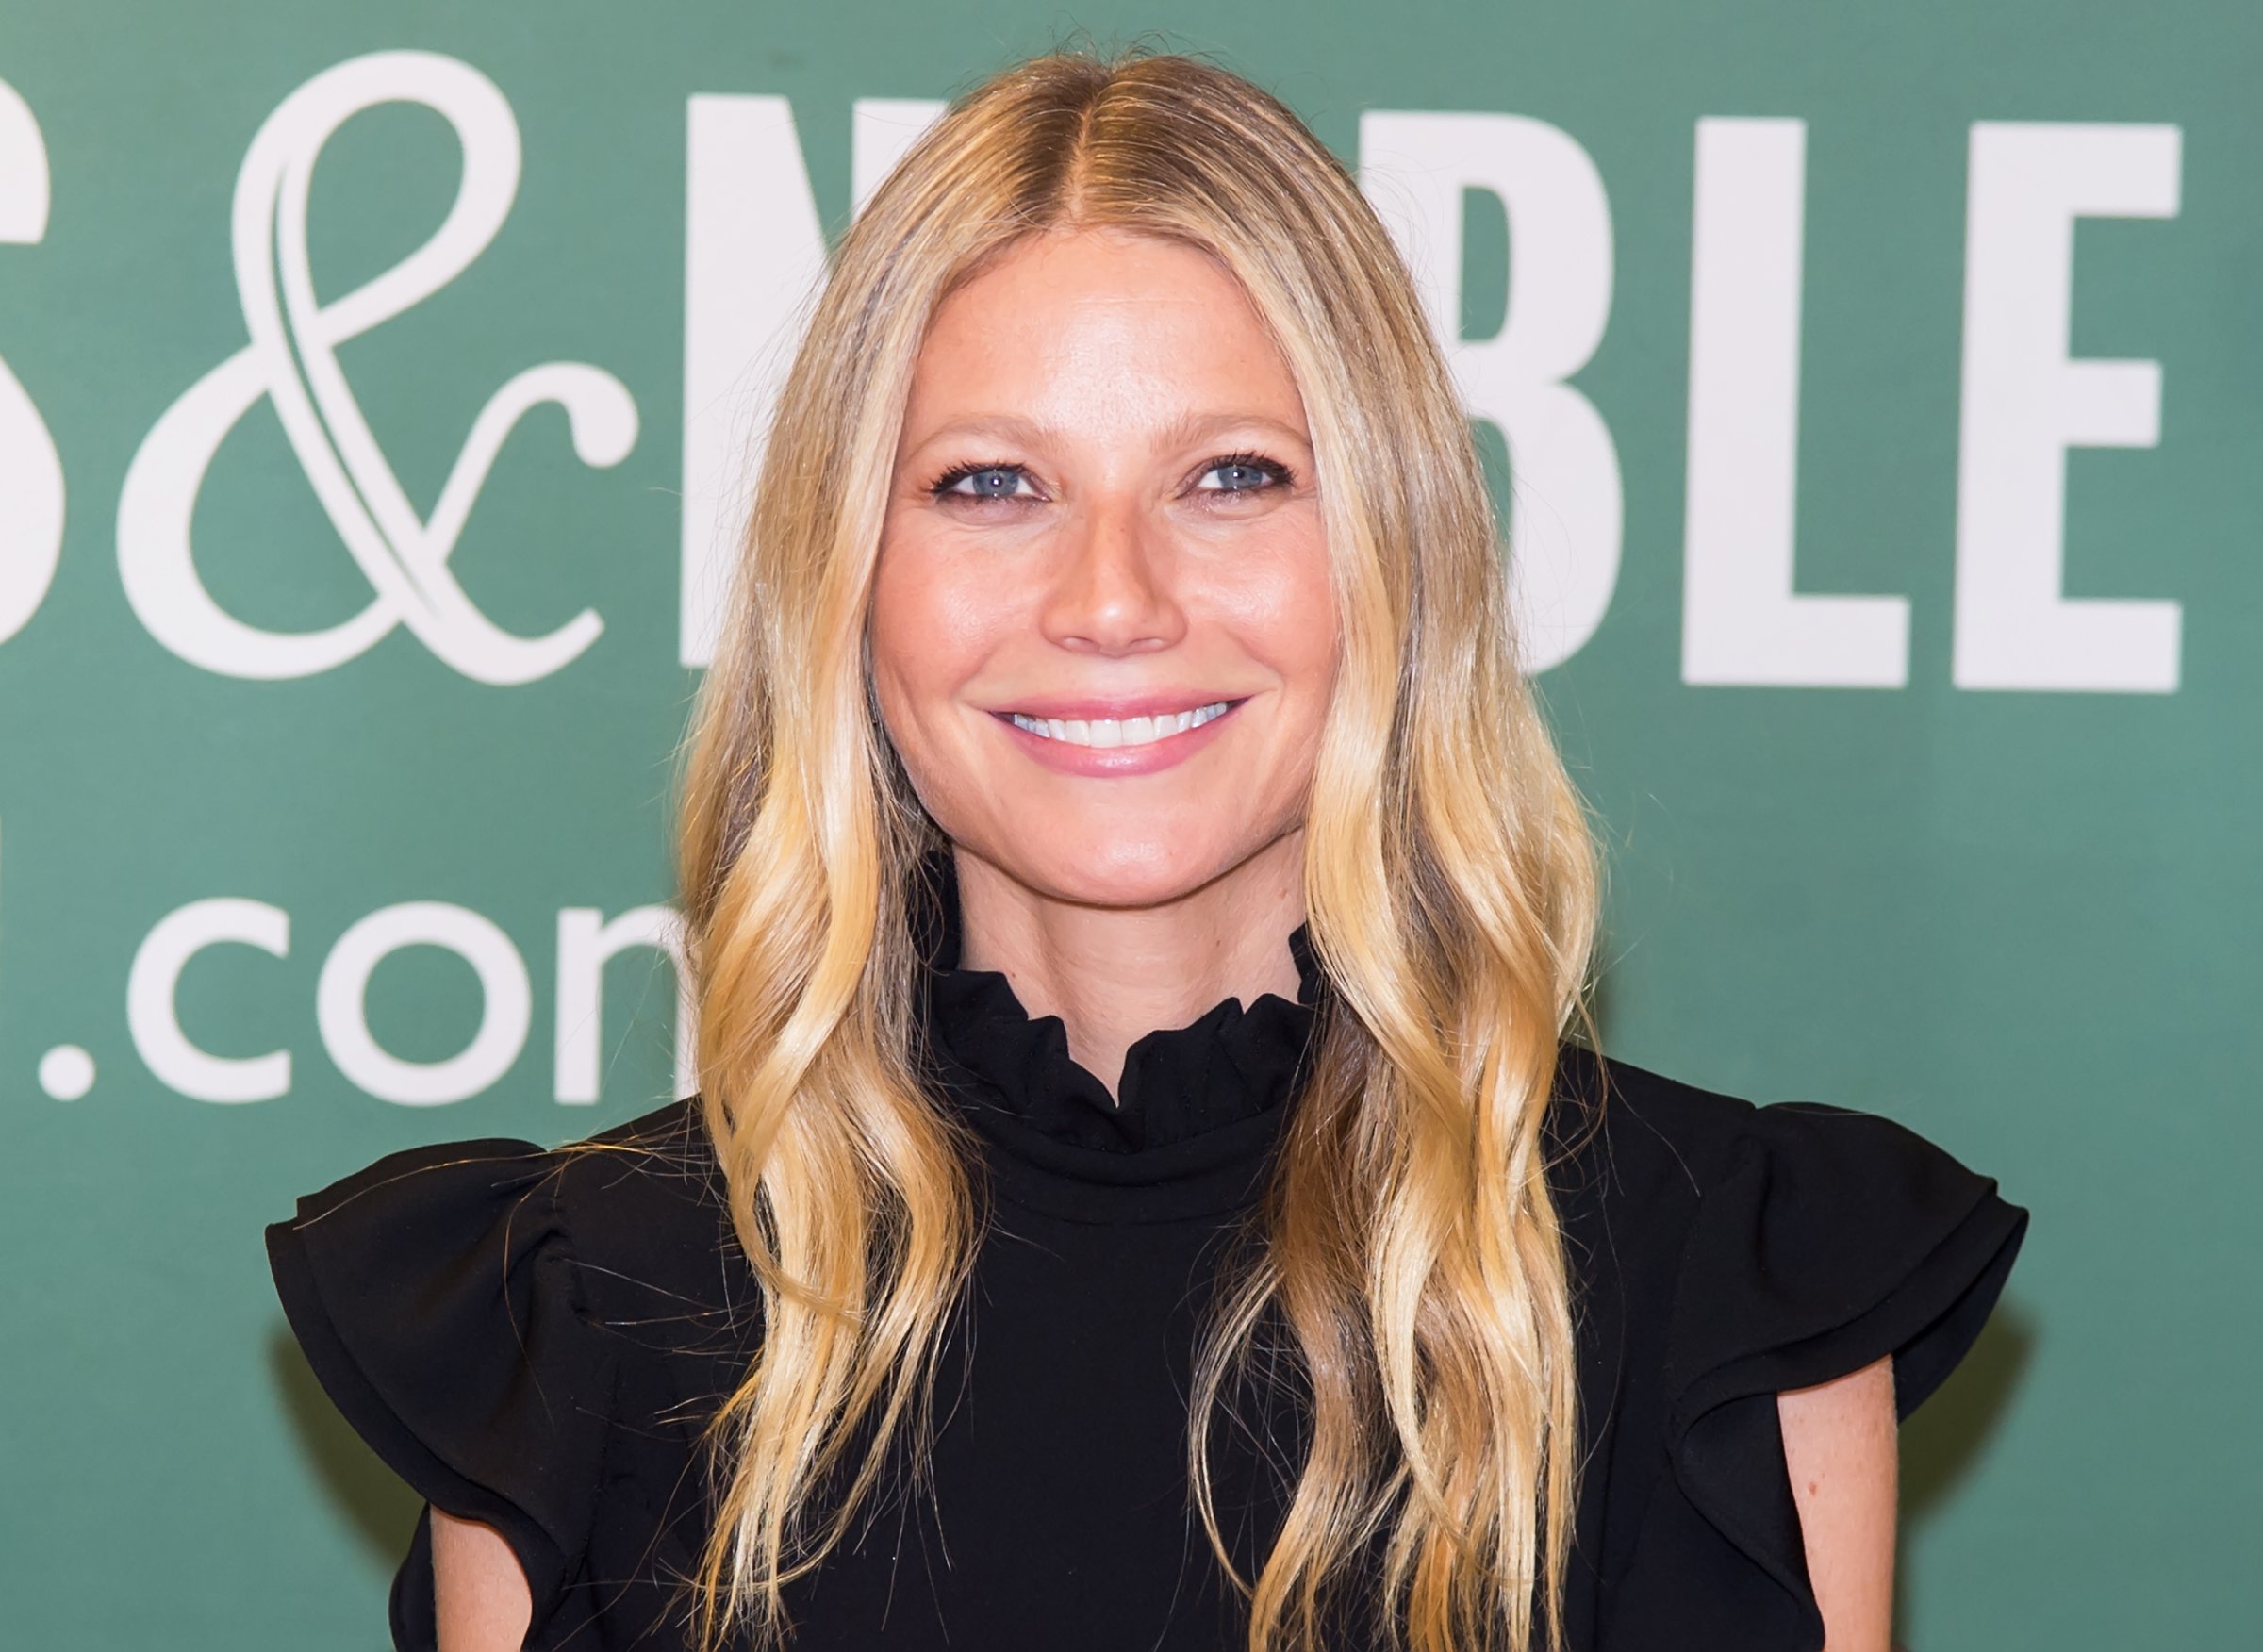 Gwyneth Paltrow Signs Copies Of Her New Book "It's All Easy"